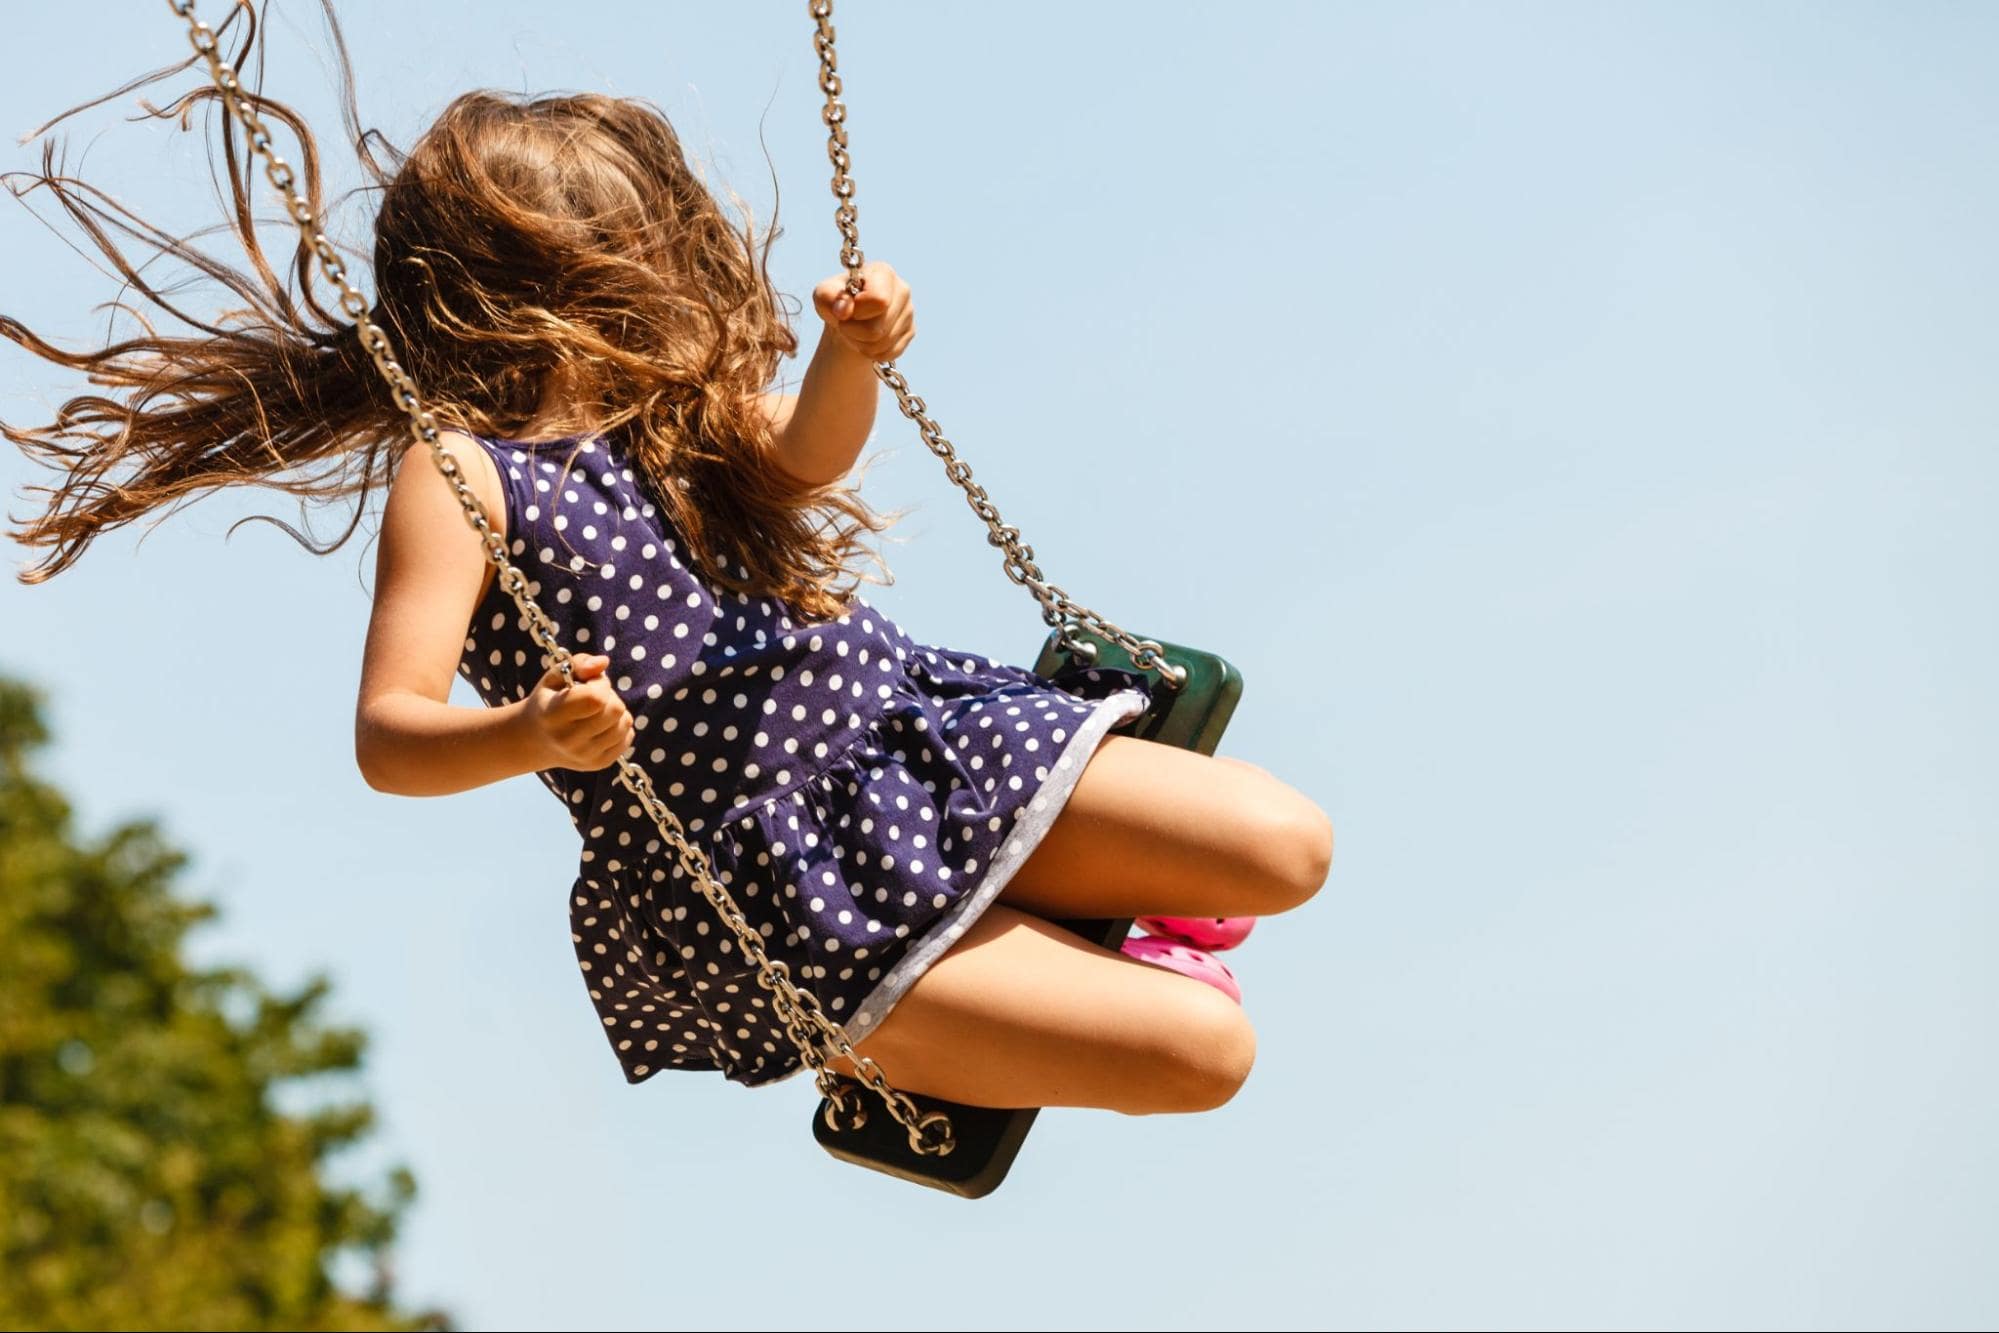 A young girl in a summer dress swinging on a green swing set.